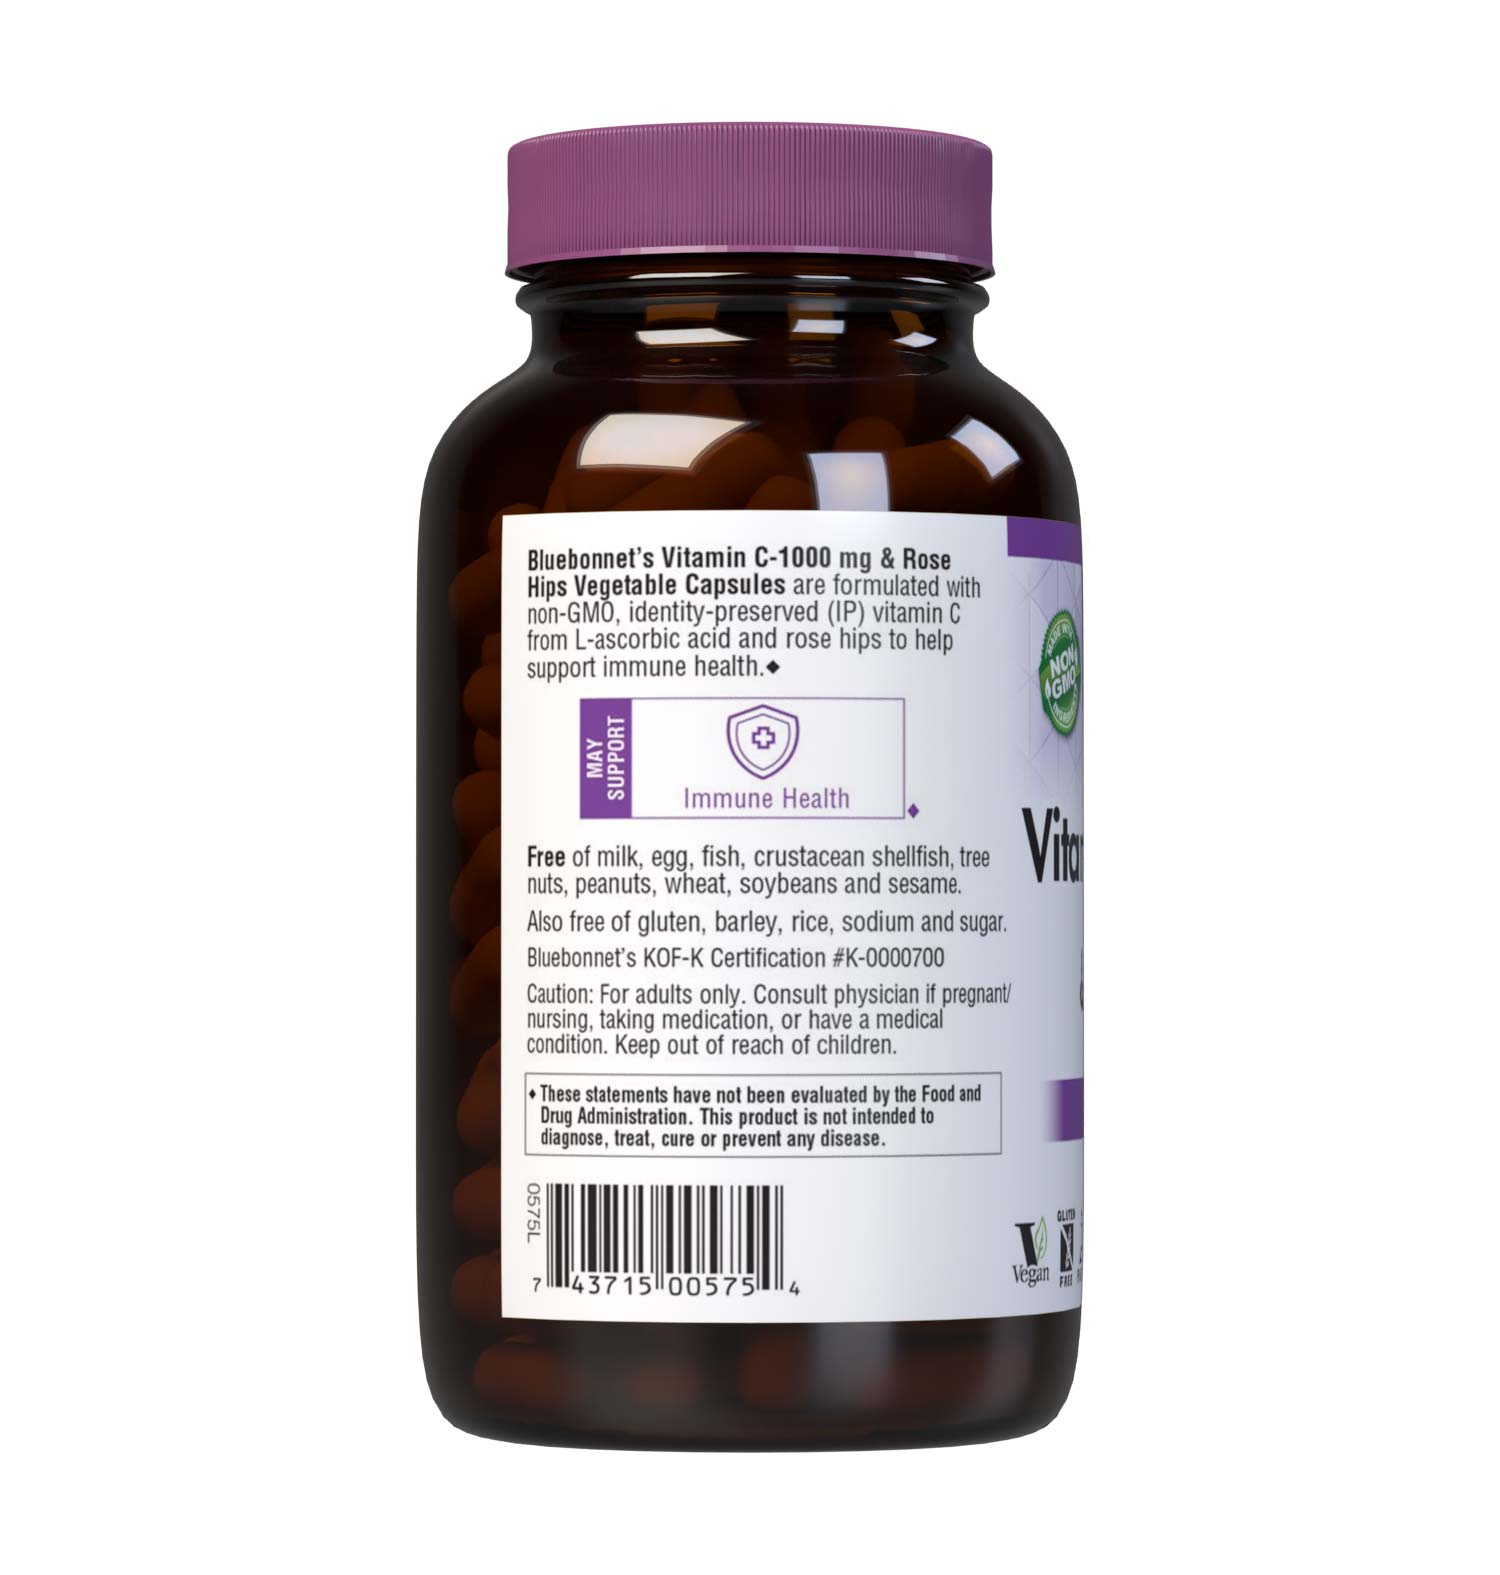 Bluebonnet’s Vitamin C-1000 mg & Rose Hips 180 Vegetable Capsules are formulated with non-GMO, identity preserved (IP) vitamin C from L-ascorbic acid and rose hips to help support immune function. Description panel. #size_180 count